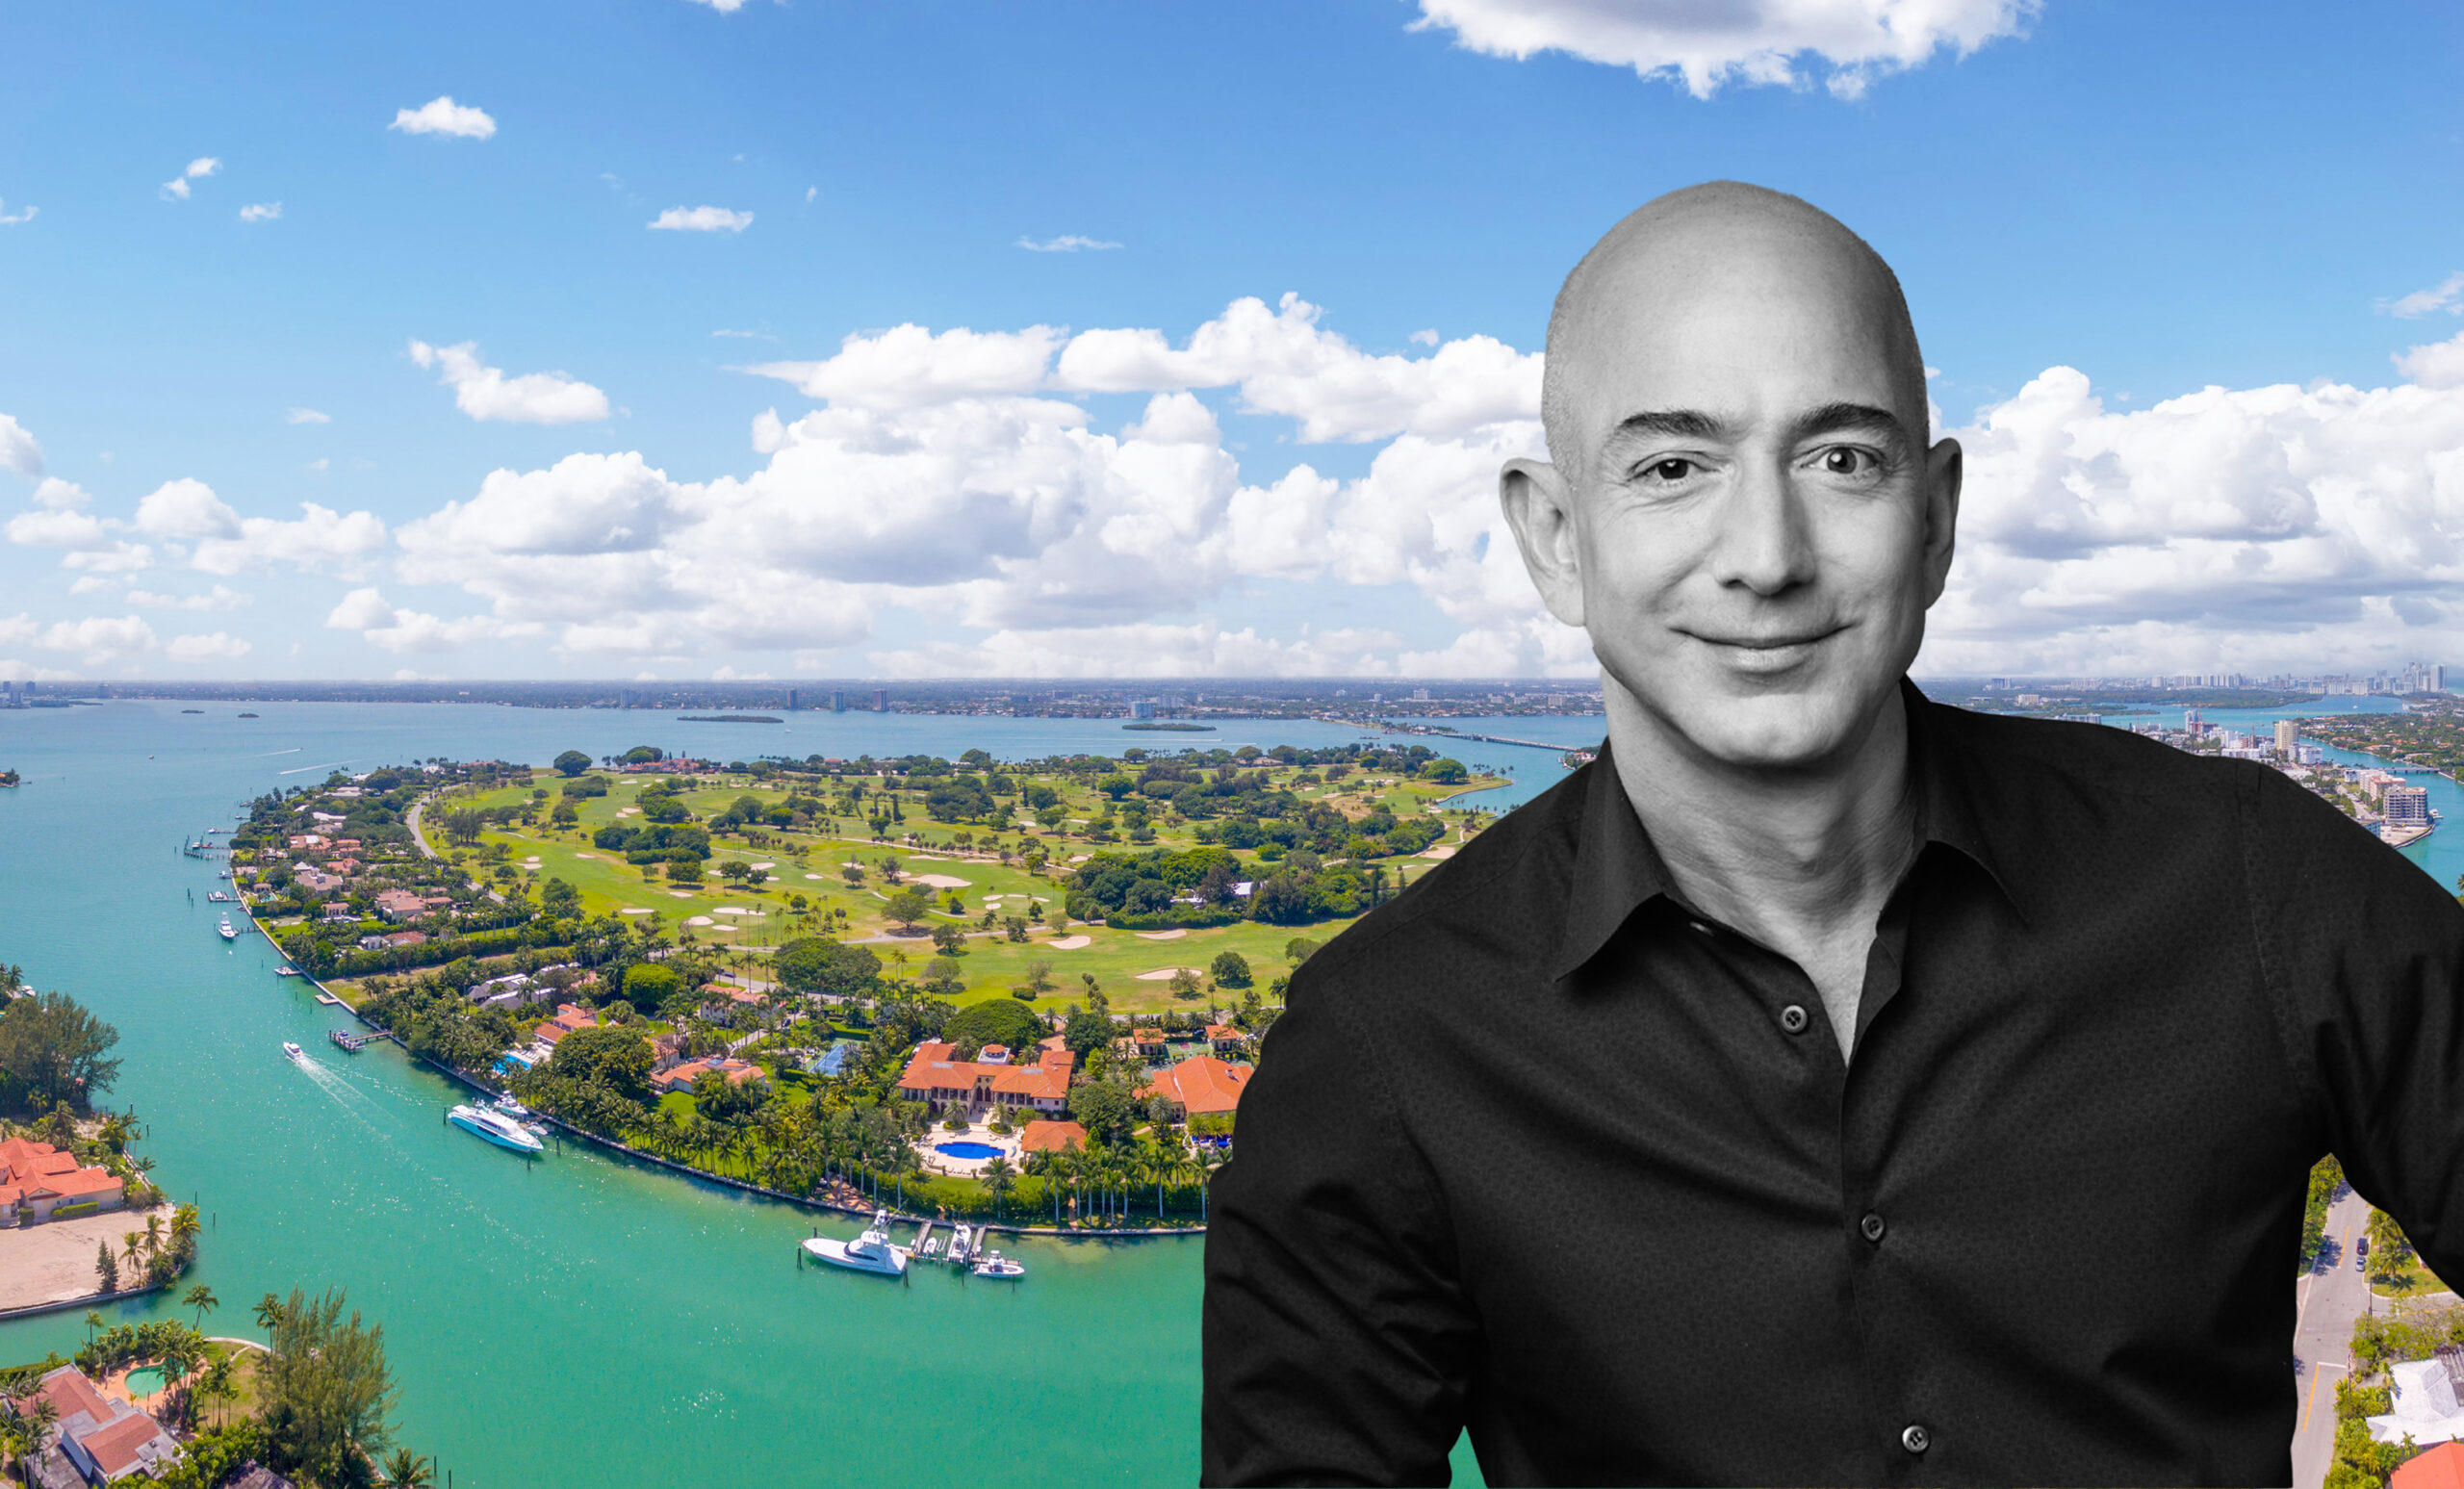 Jeff Bezos Acquires $68 Million Island Mansion in Miami’s ‘Billionaire Bunker’ Enclave, Joining Elite Circles of the Super Affluent